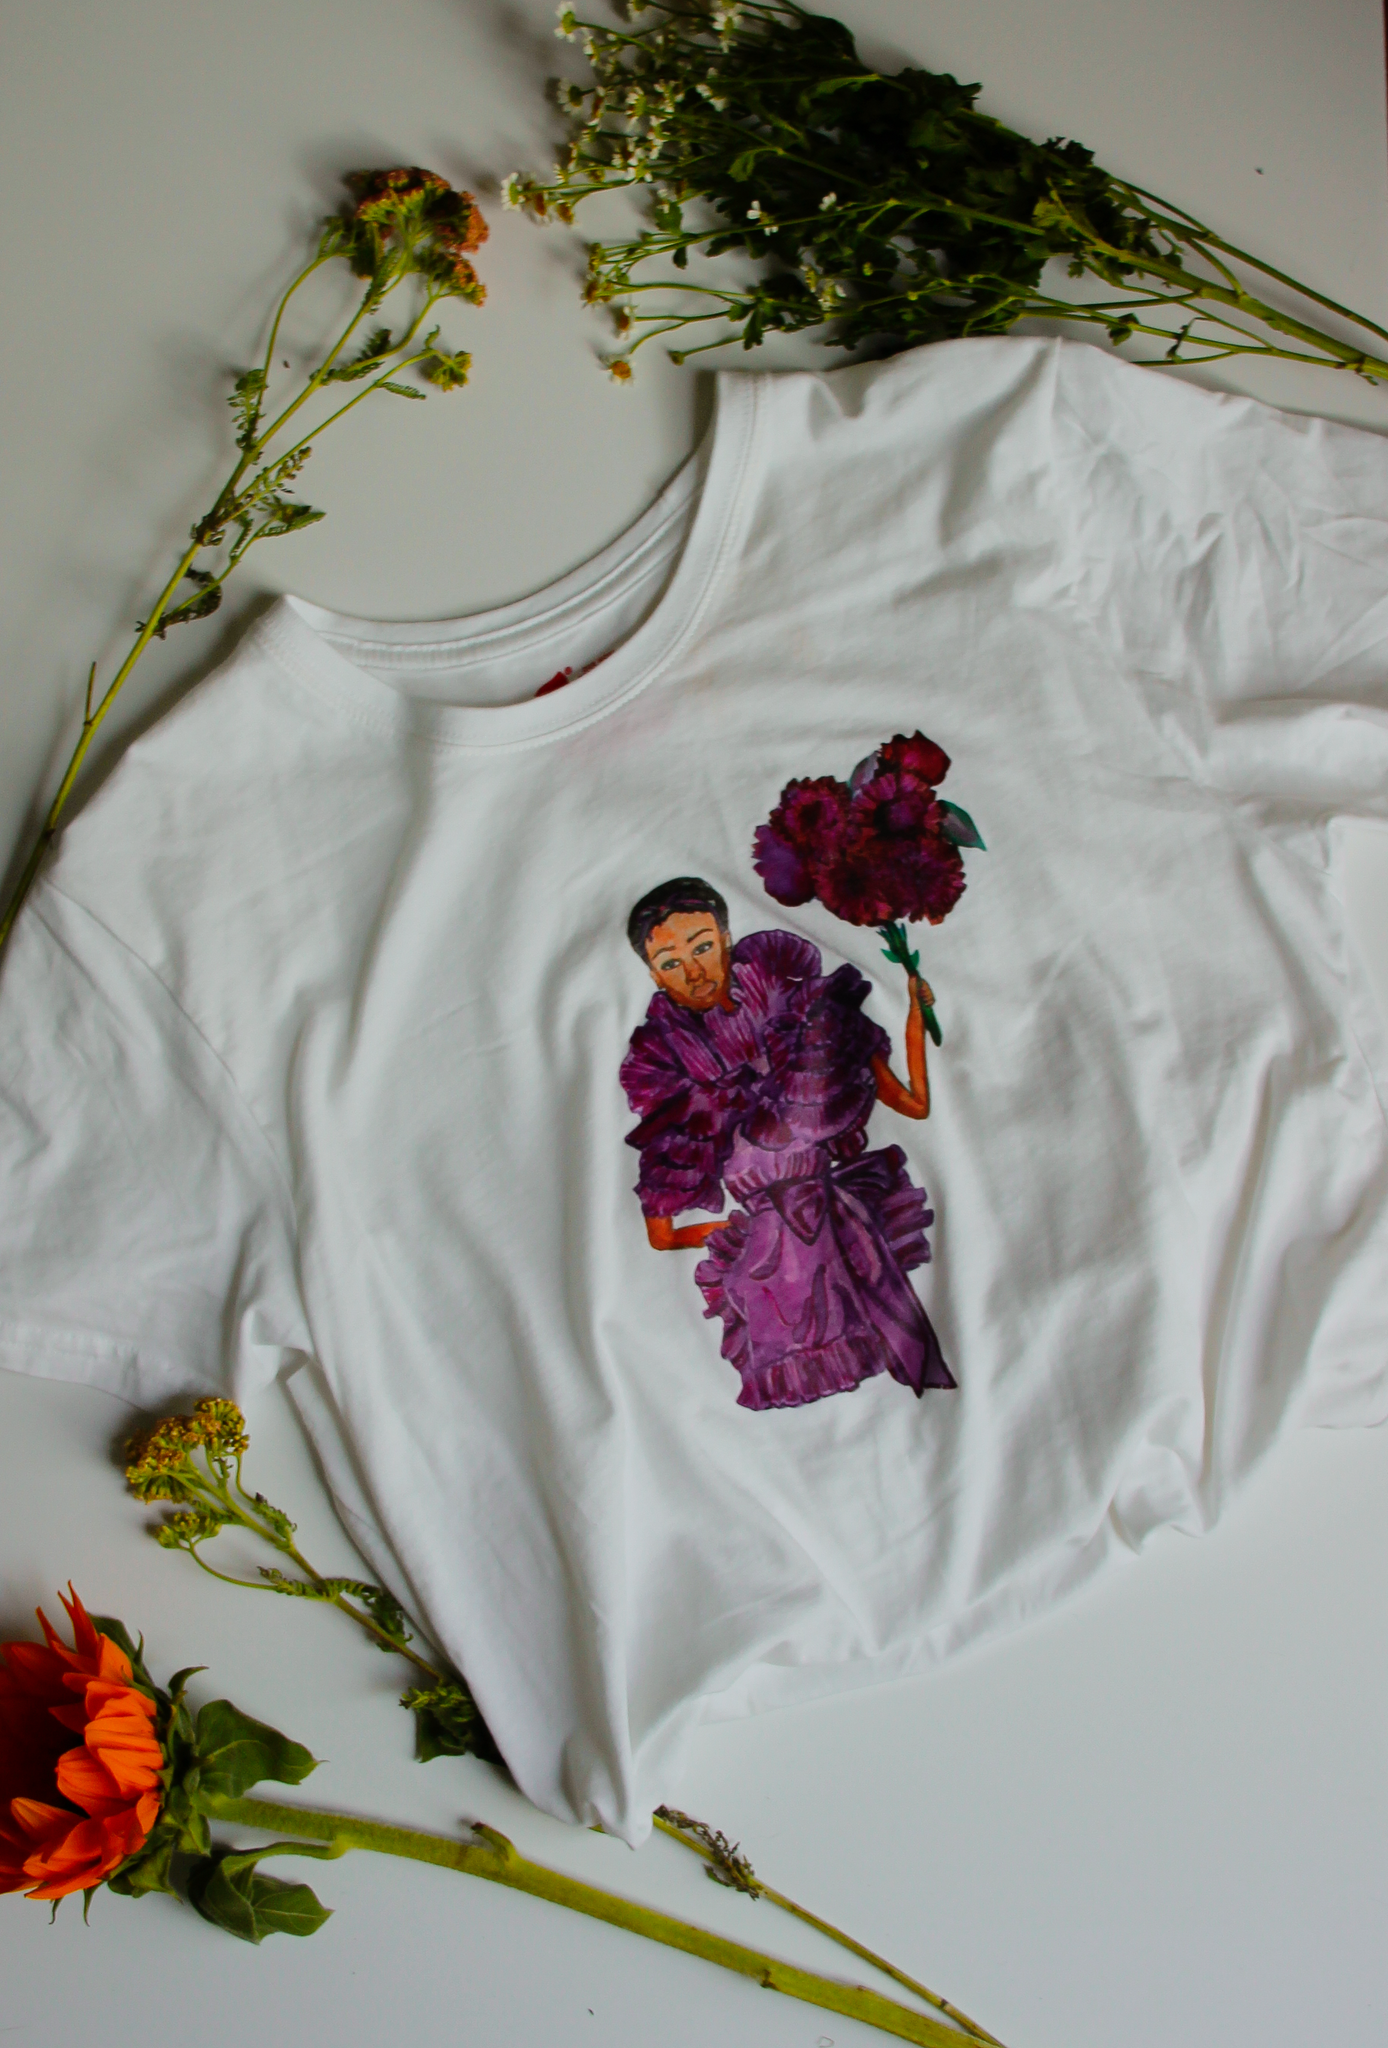 An upcycled white t-shirt with an illustration on it of model Janaye Furman wearing a ruffled purple gown